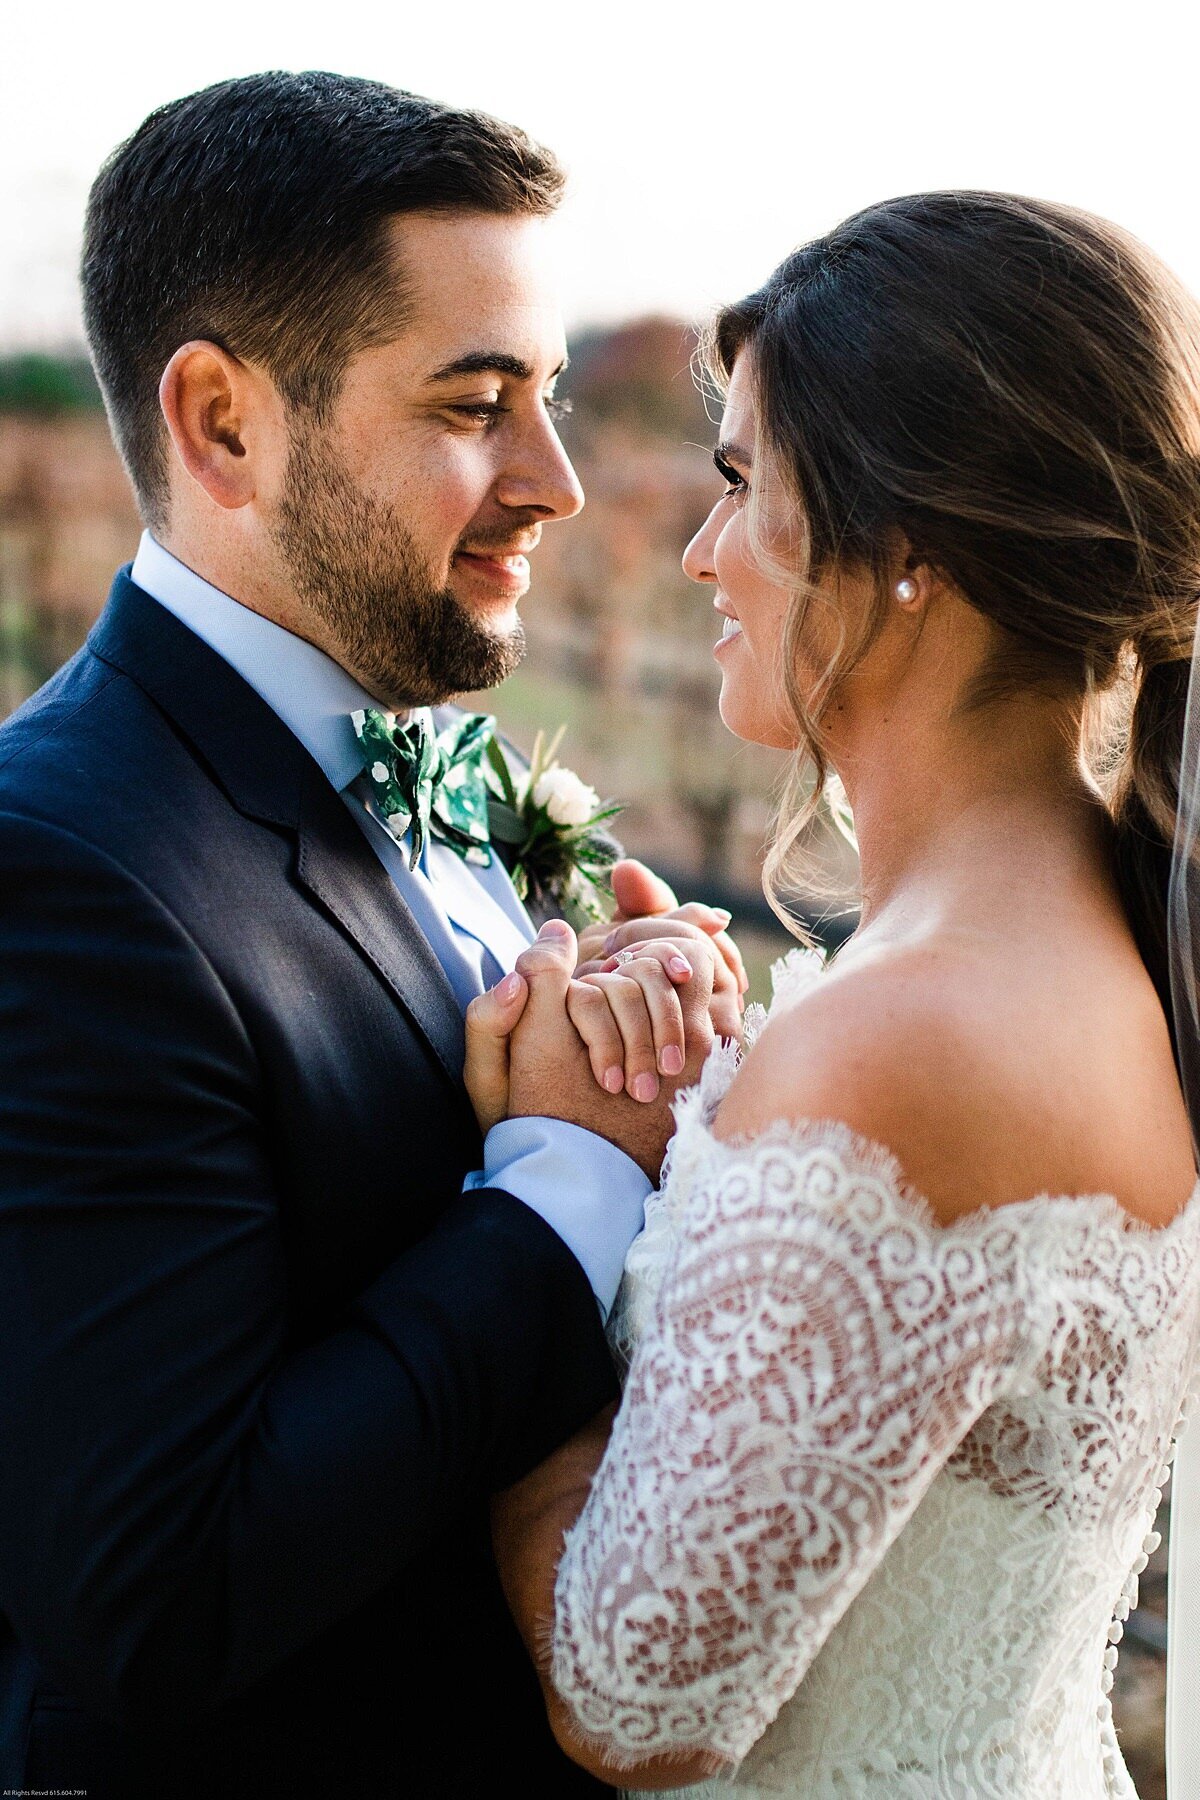 bride in a long sleeved white lace dress holds hands with the groom wearing a dark blue suit as they look into each other's eyes